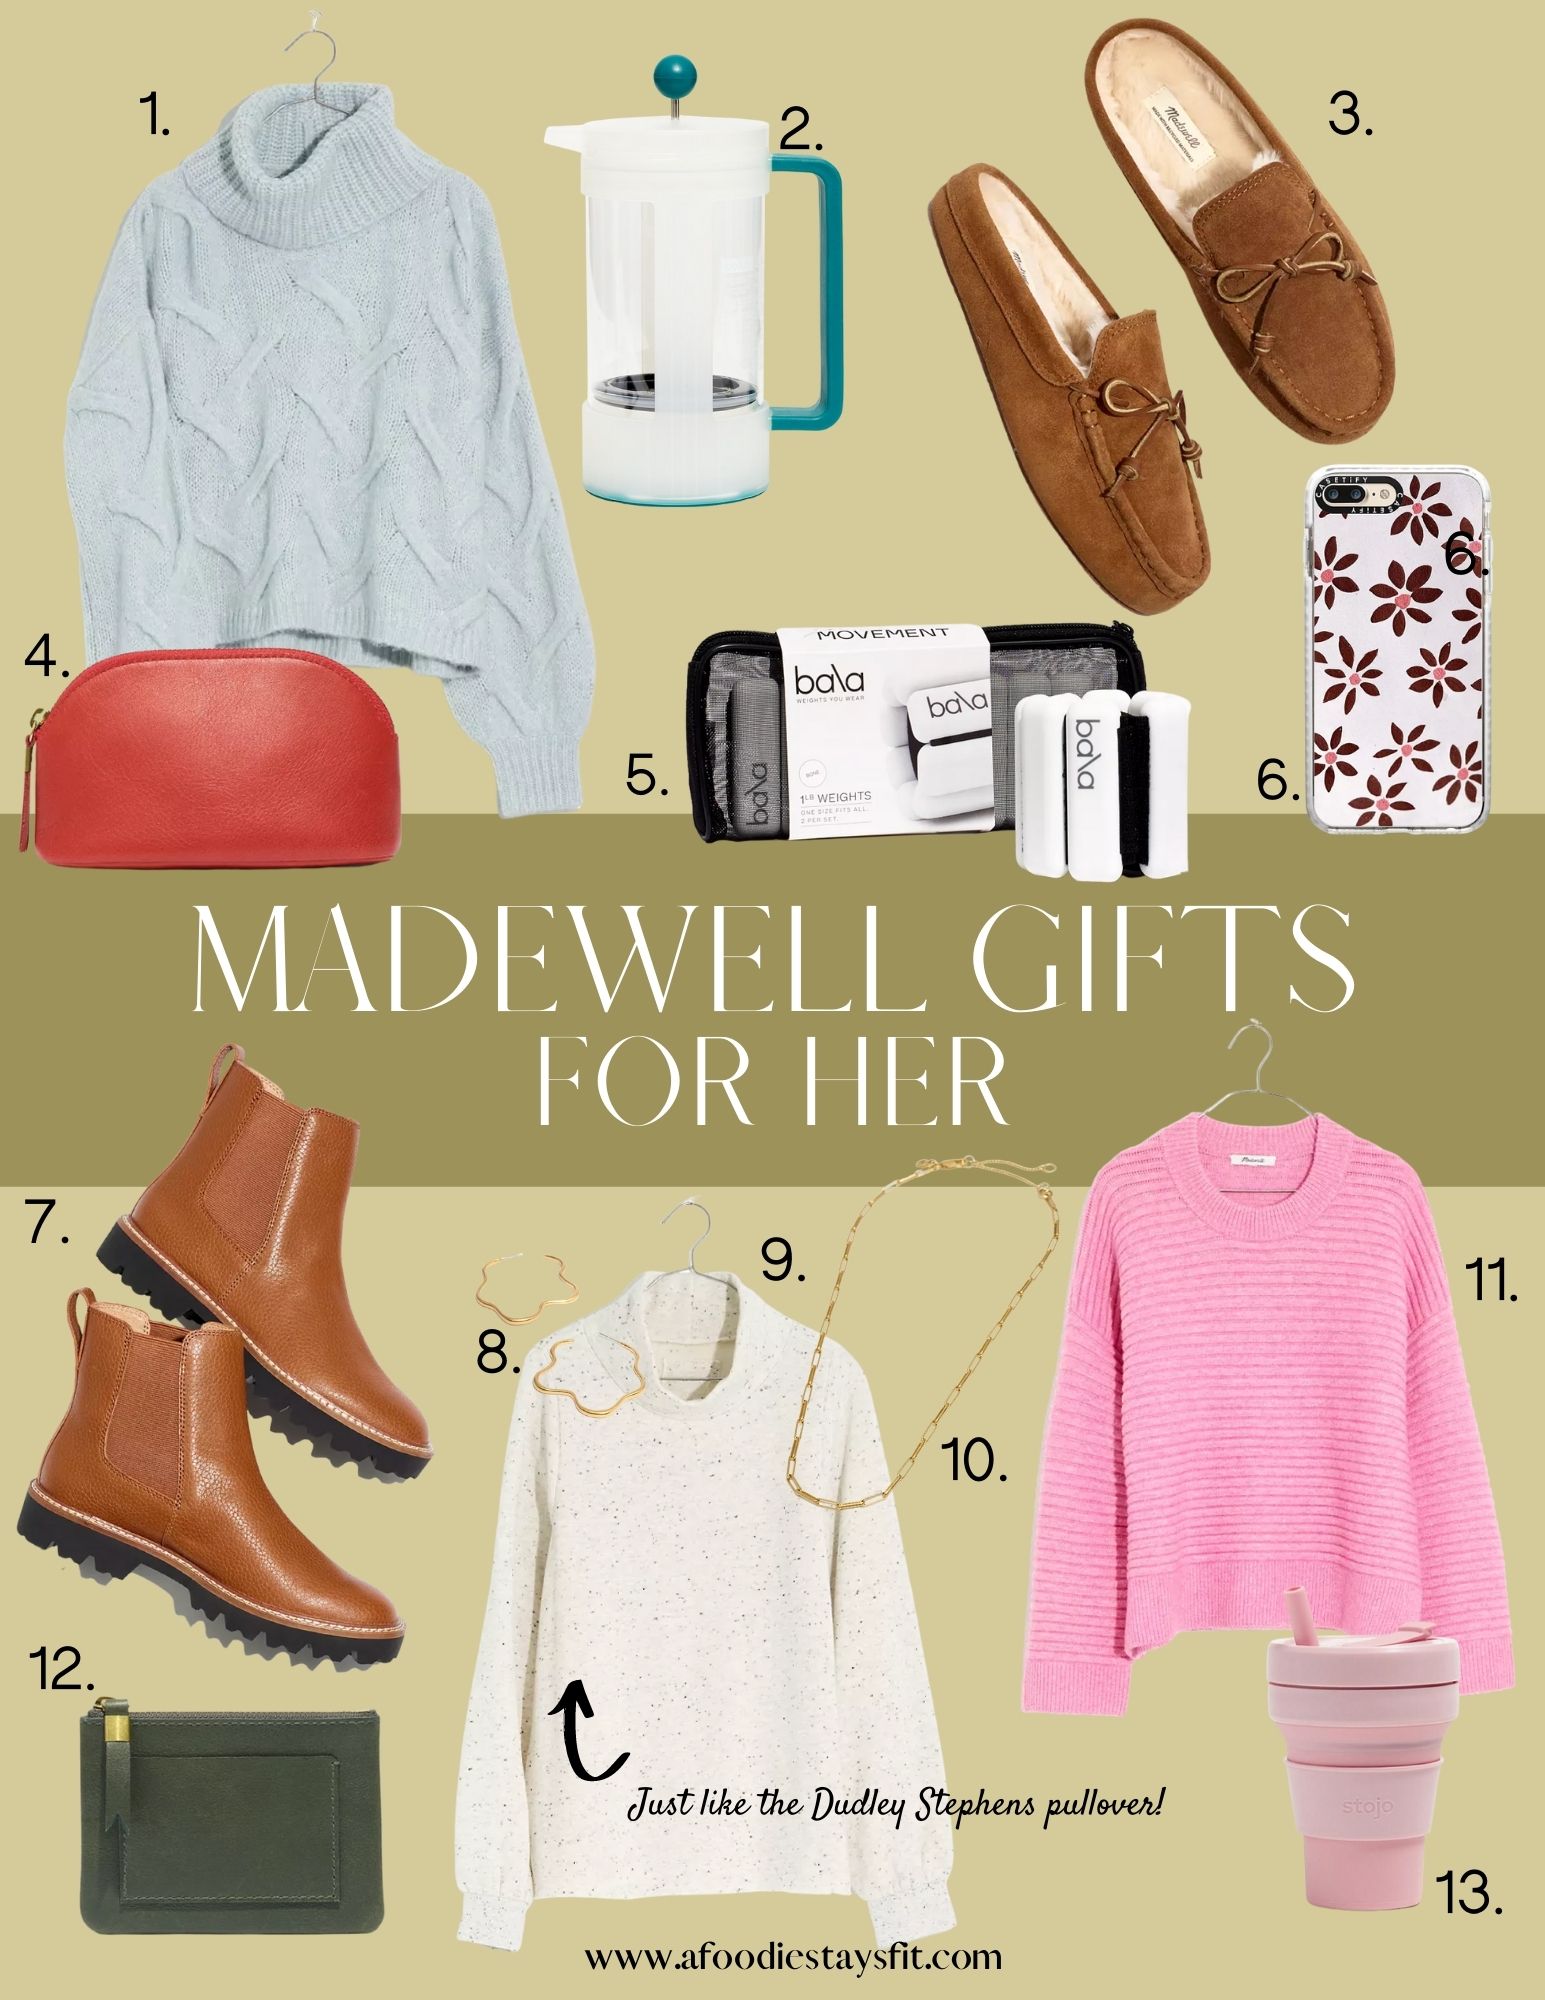 Madewell Gifts for Her